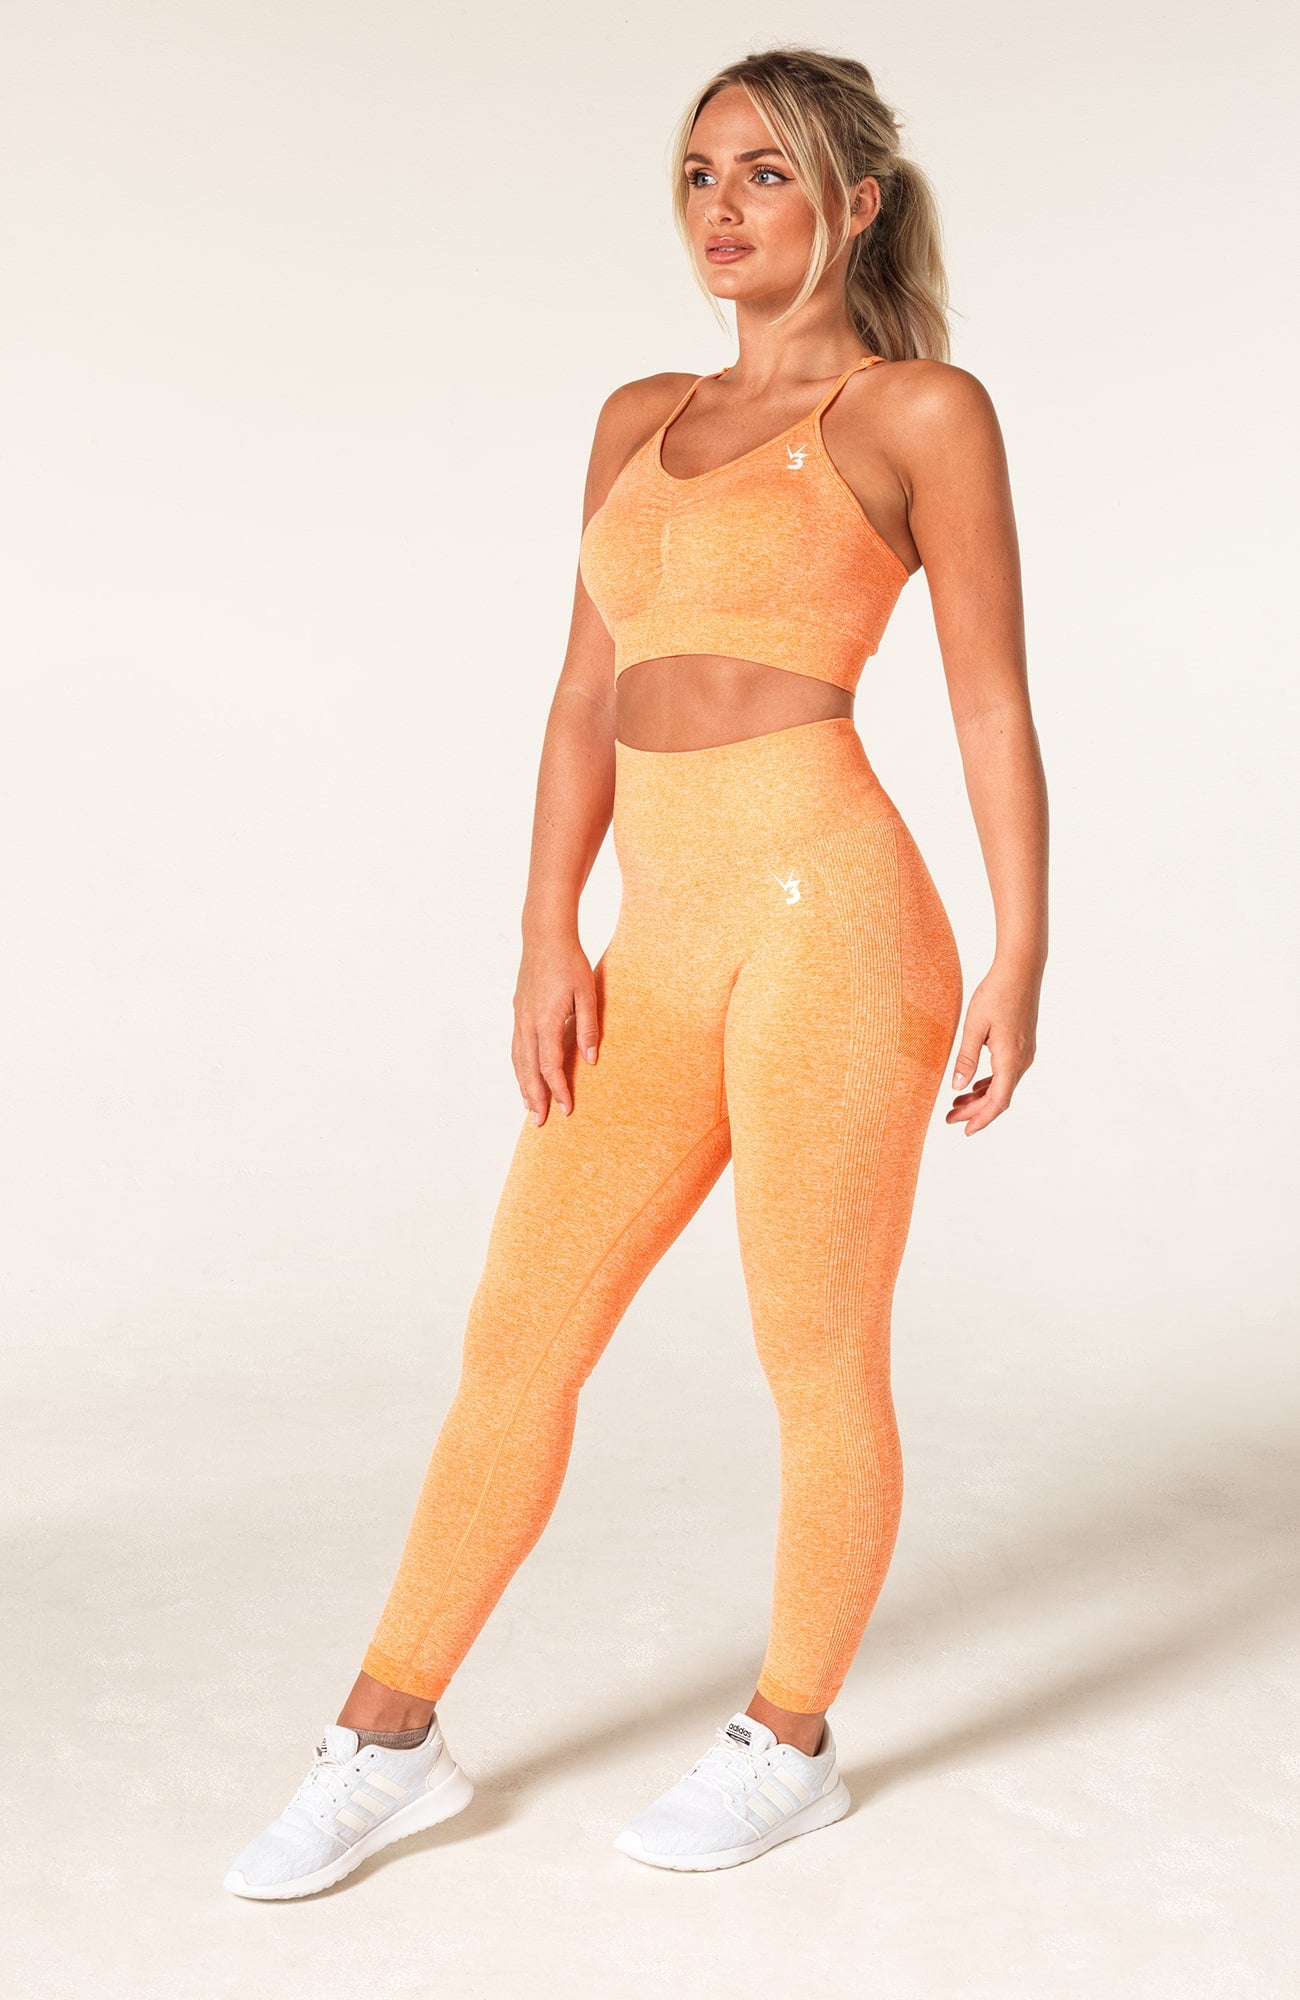 V3 Apparel womens Define orange marl scrunch bum shaping workout gym leggings and squat proof fitness tights with high waisted and ruched seam for running, yoga, gym bodybuilding and training.